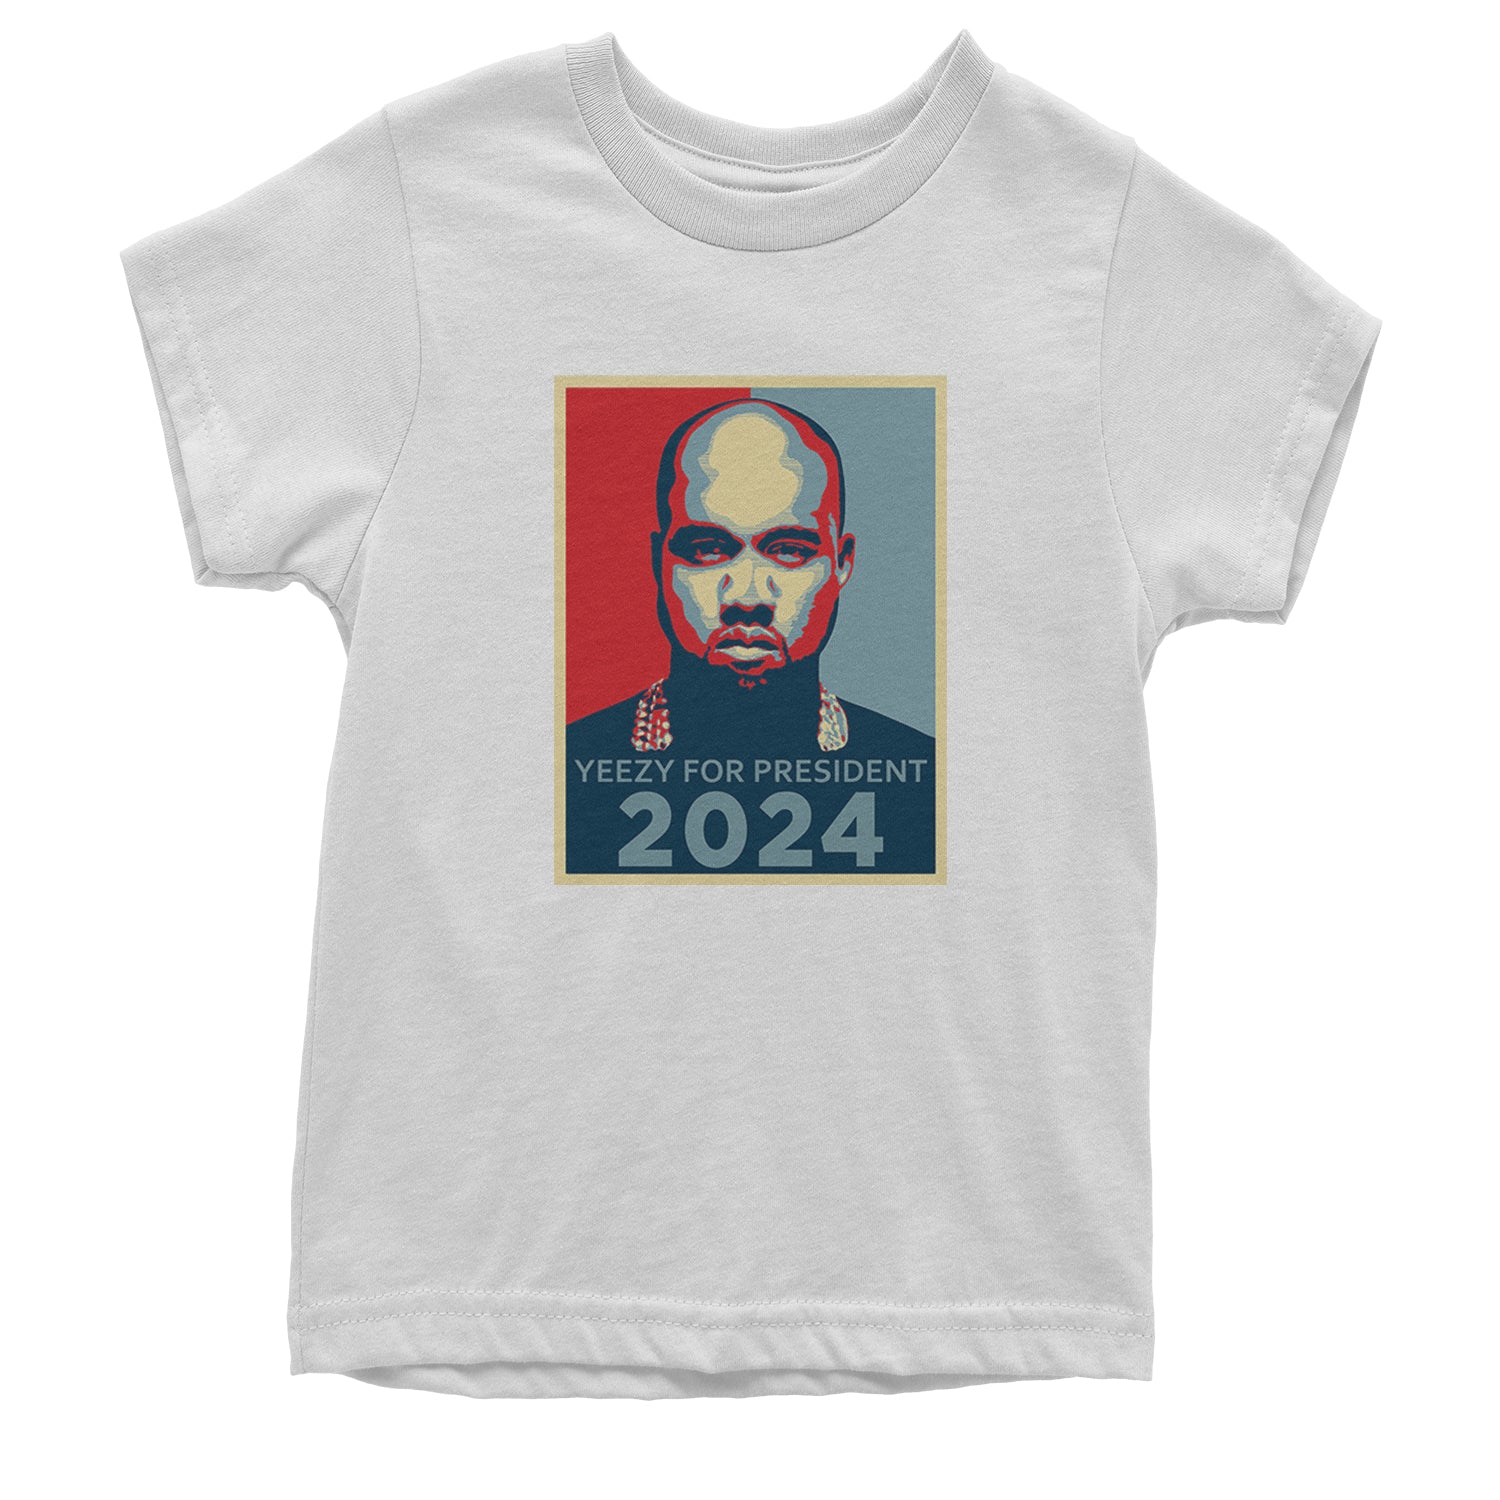 Yeezus For President Vote for Ye Youth T-shirt White